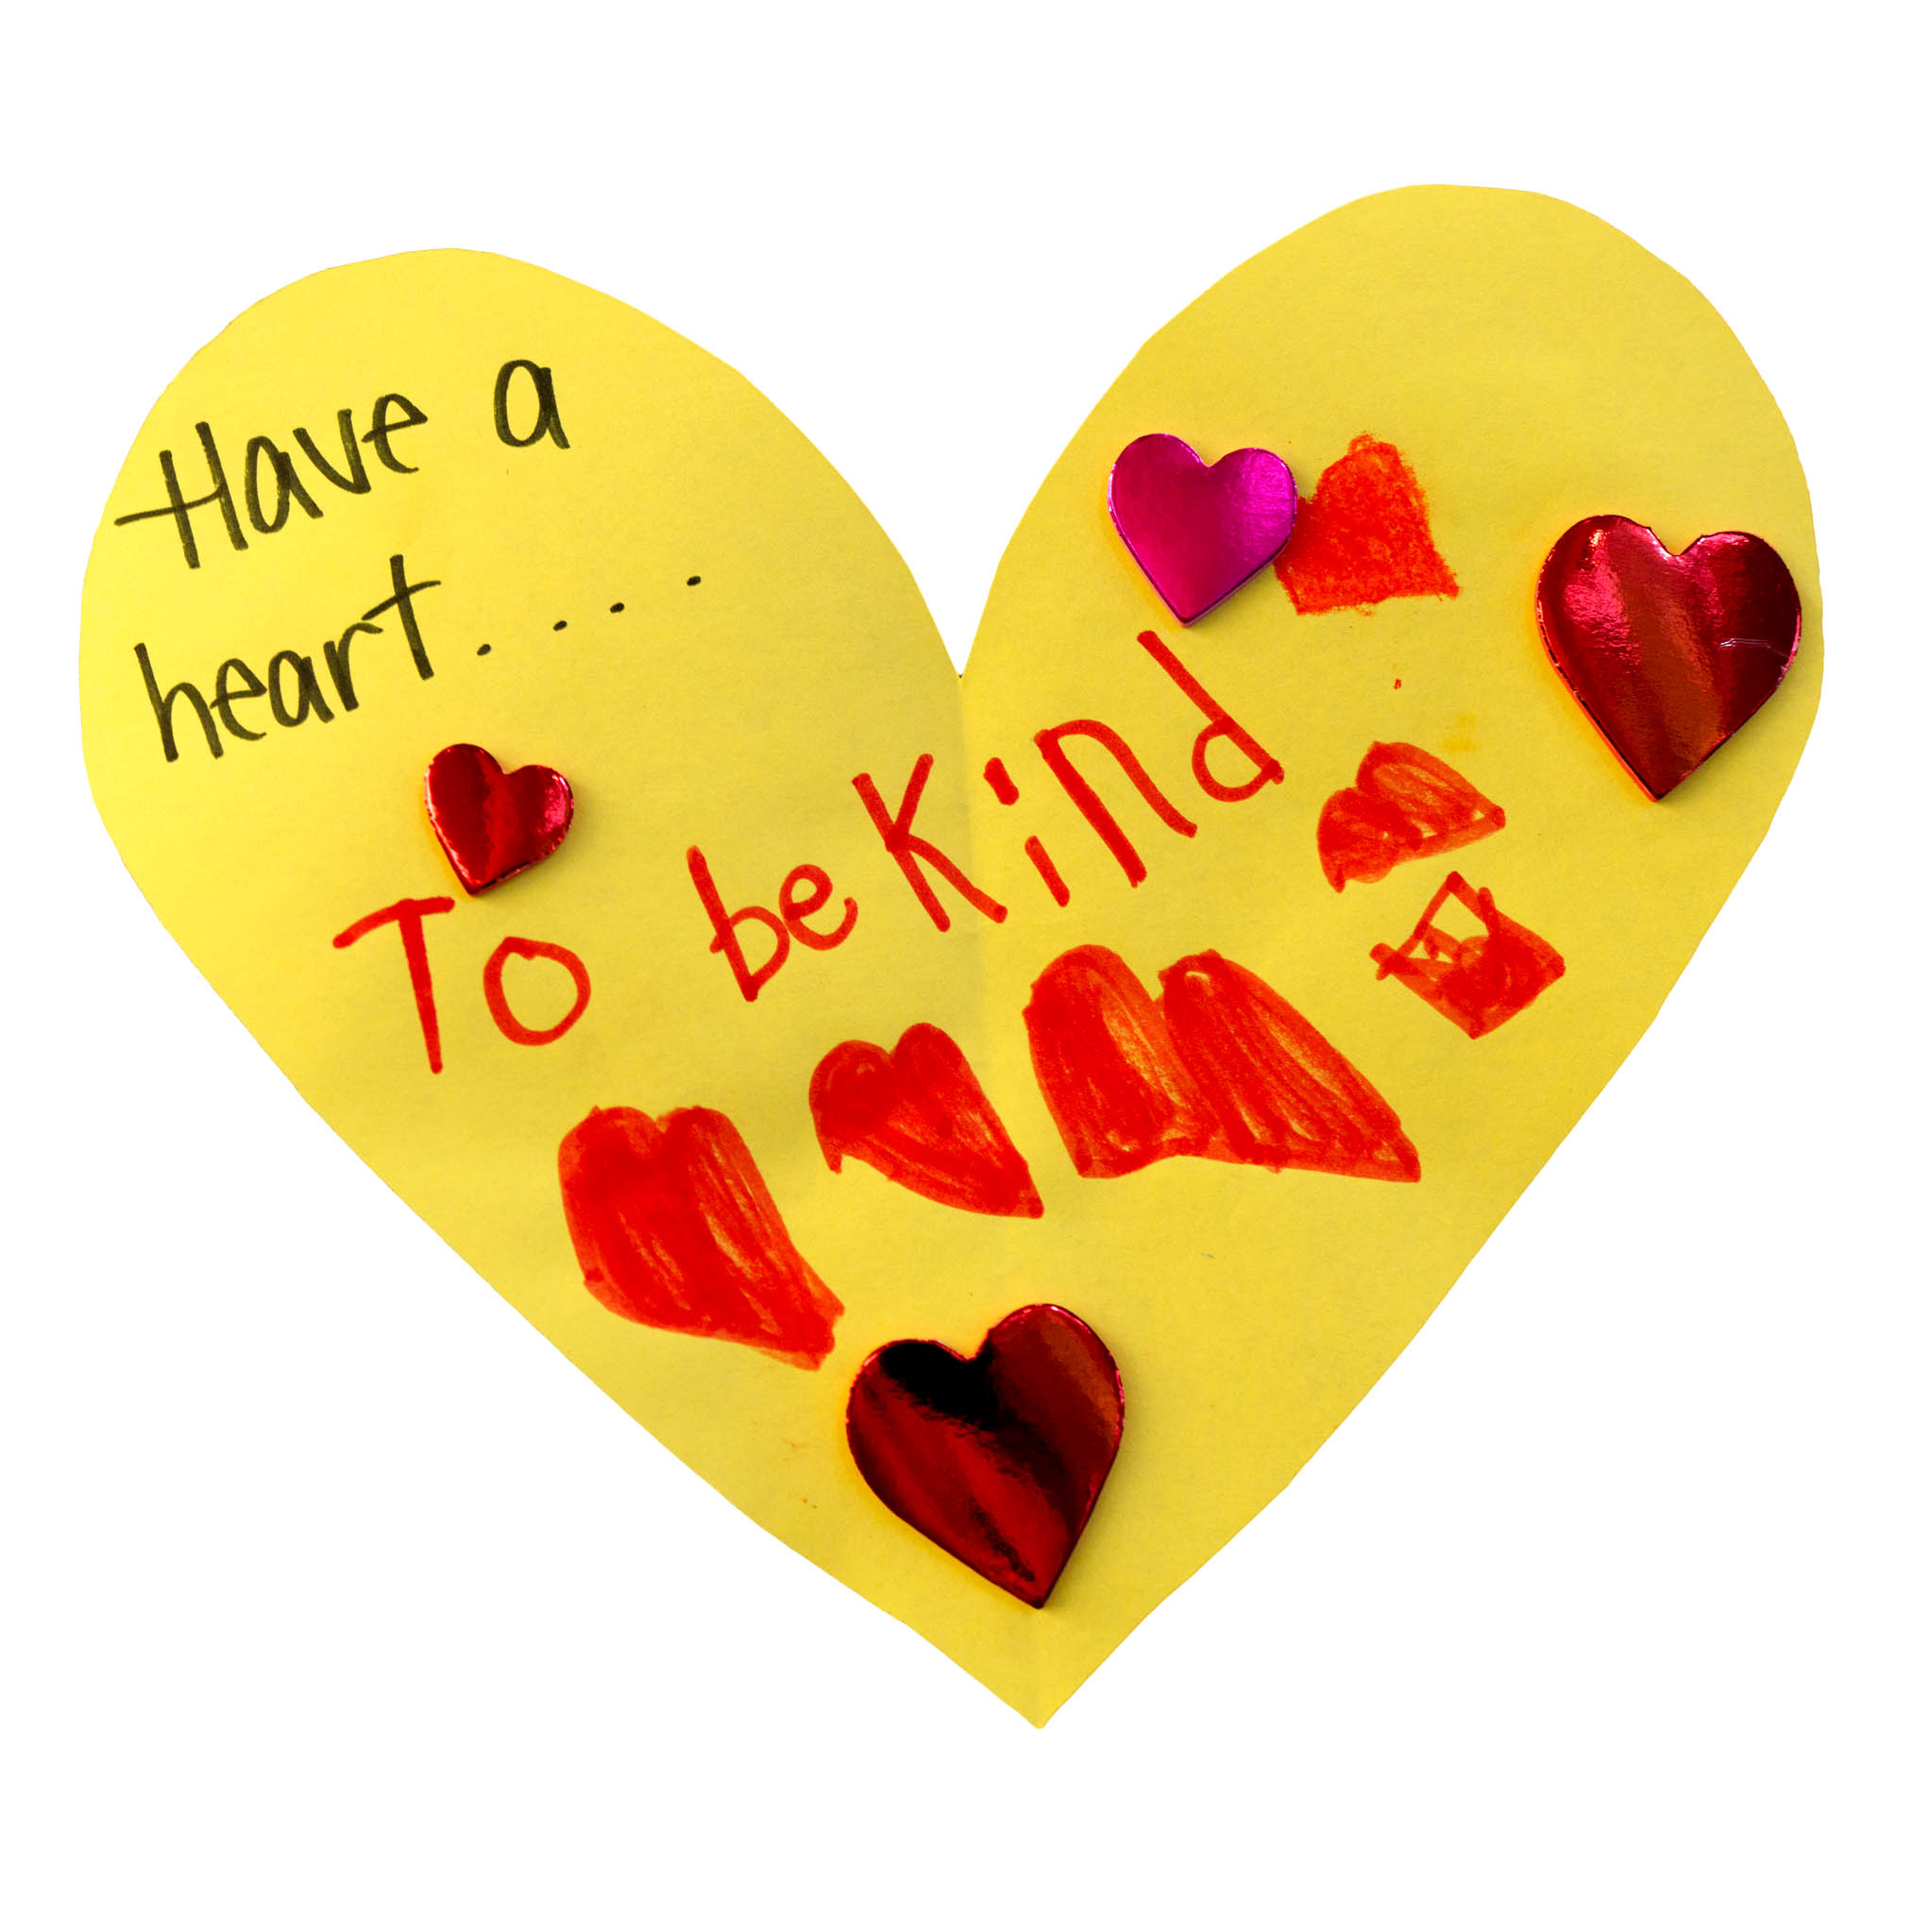 Paper heart with message reading: Have a heart to be kind.